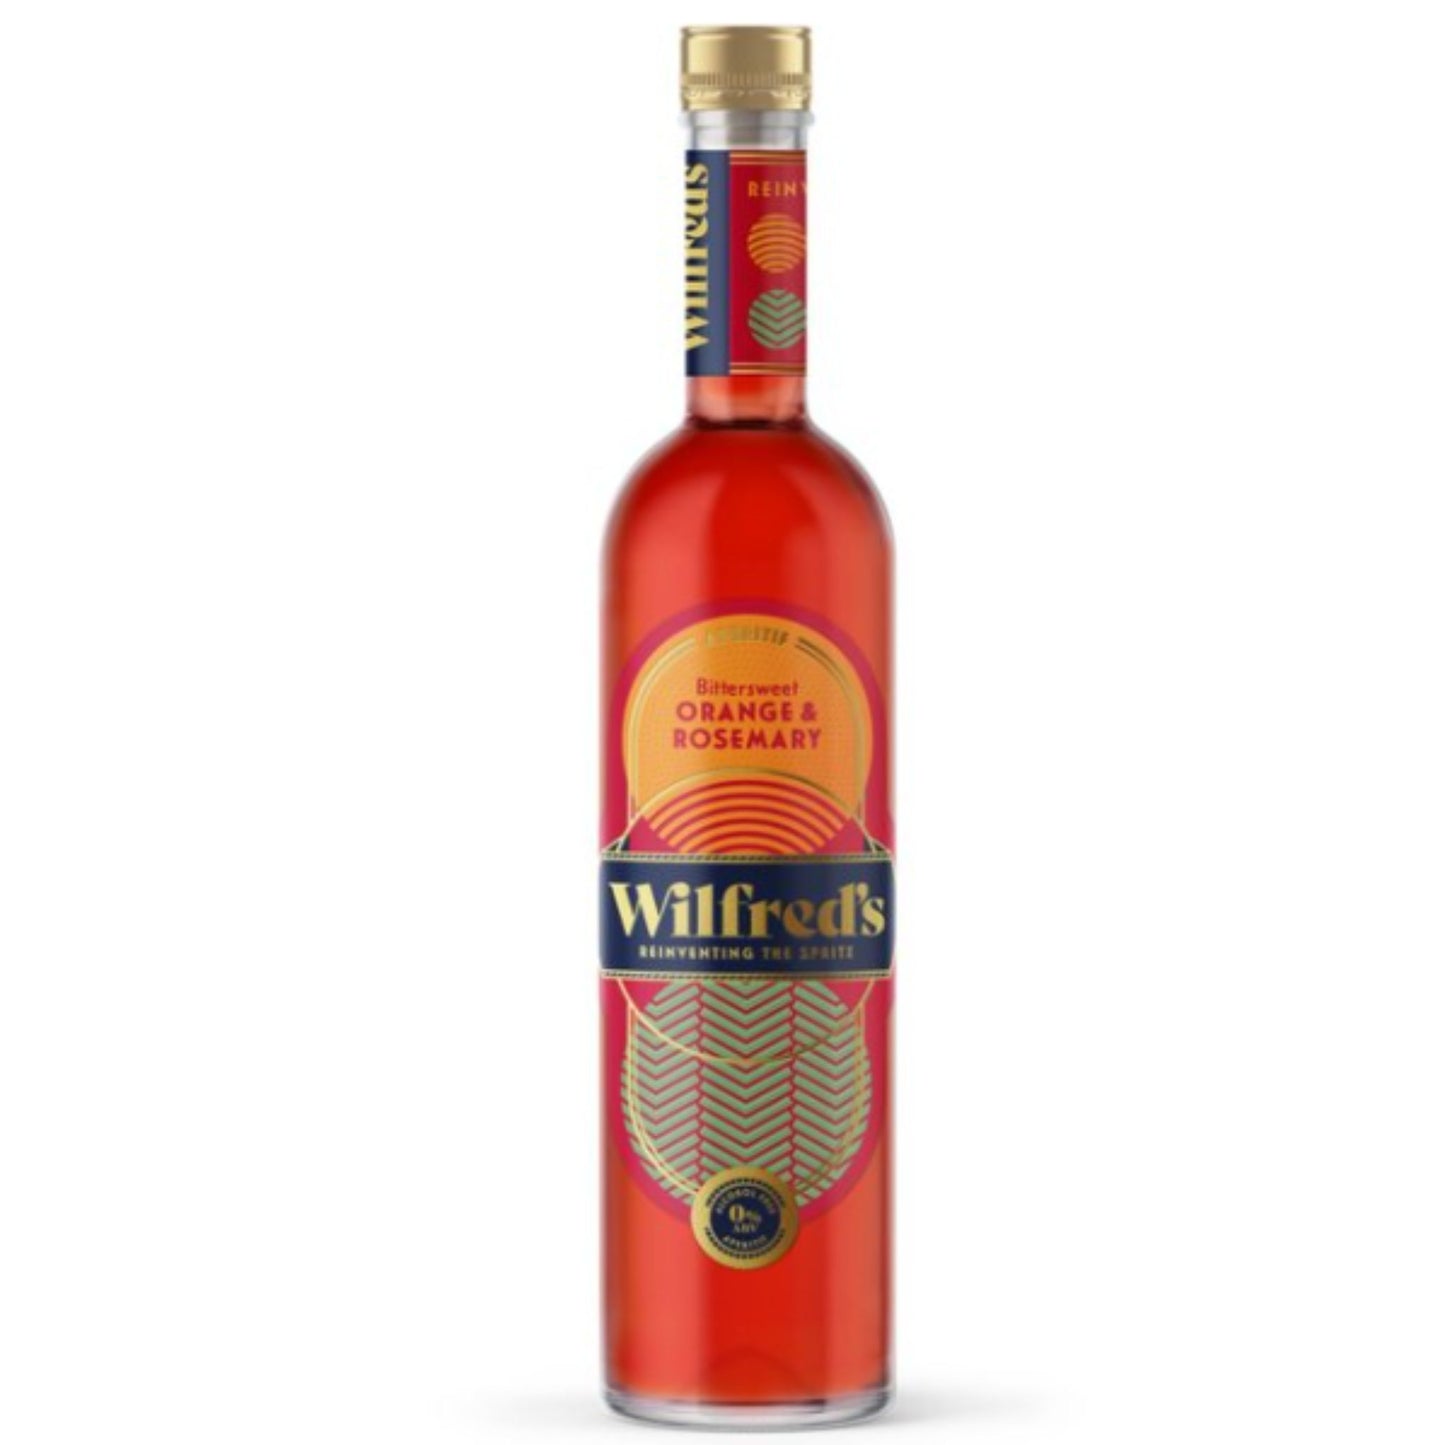 Wilfred's Bittersweet Orange & Rosemary Apertif is available for sale at Knyota Drinks.